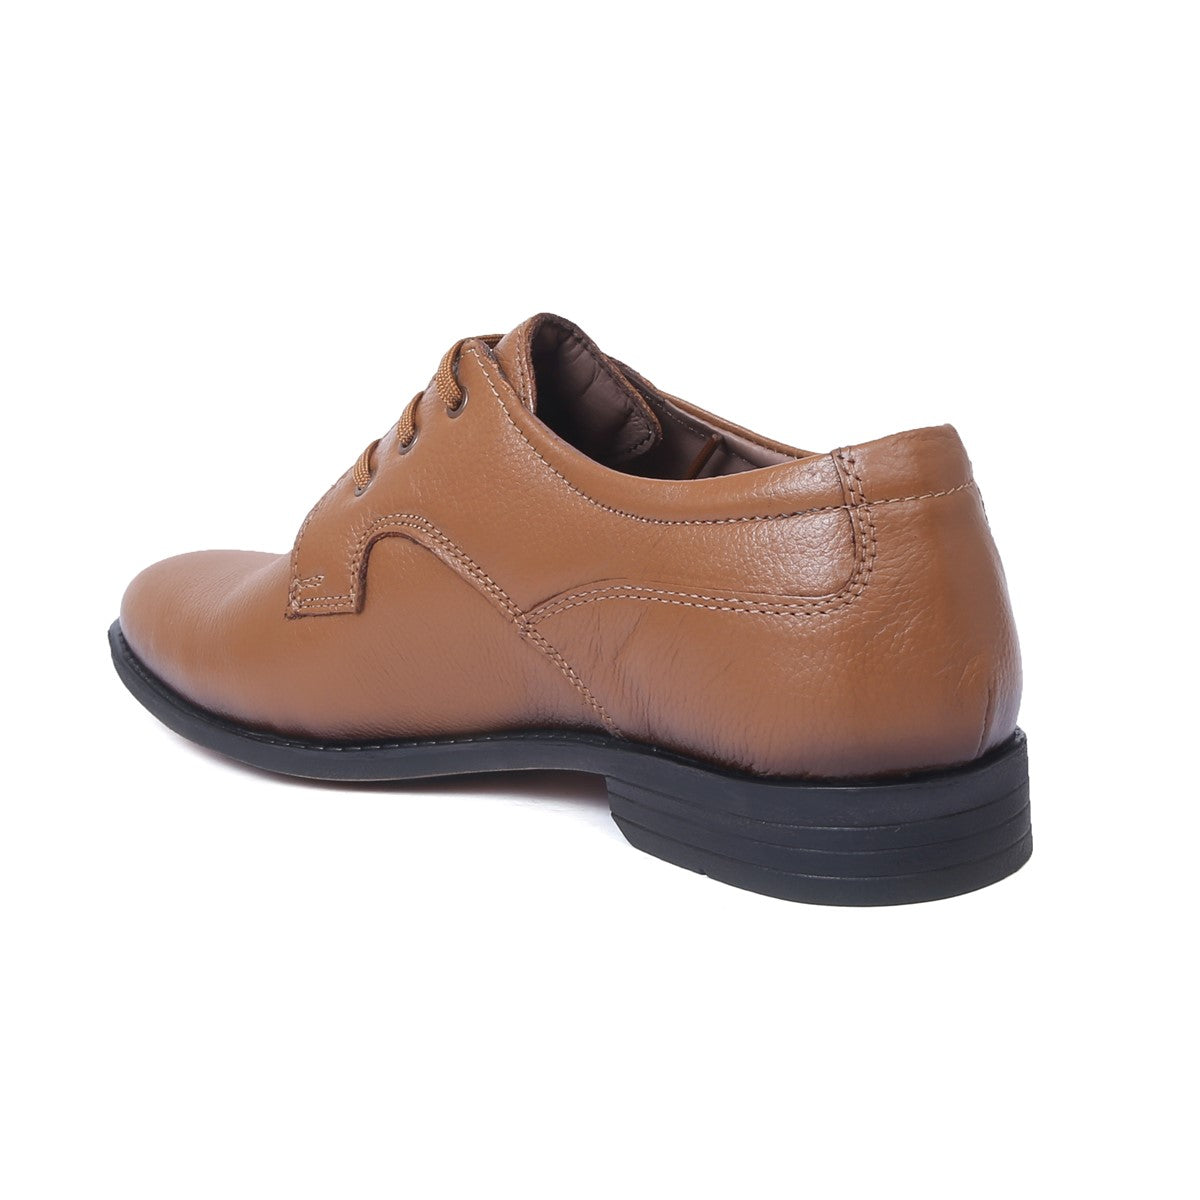 Formal Leather Shoes for Men B-51_Tan2